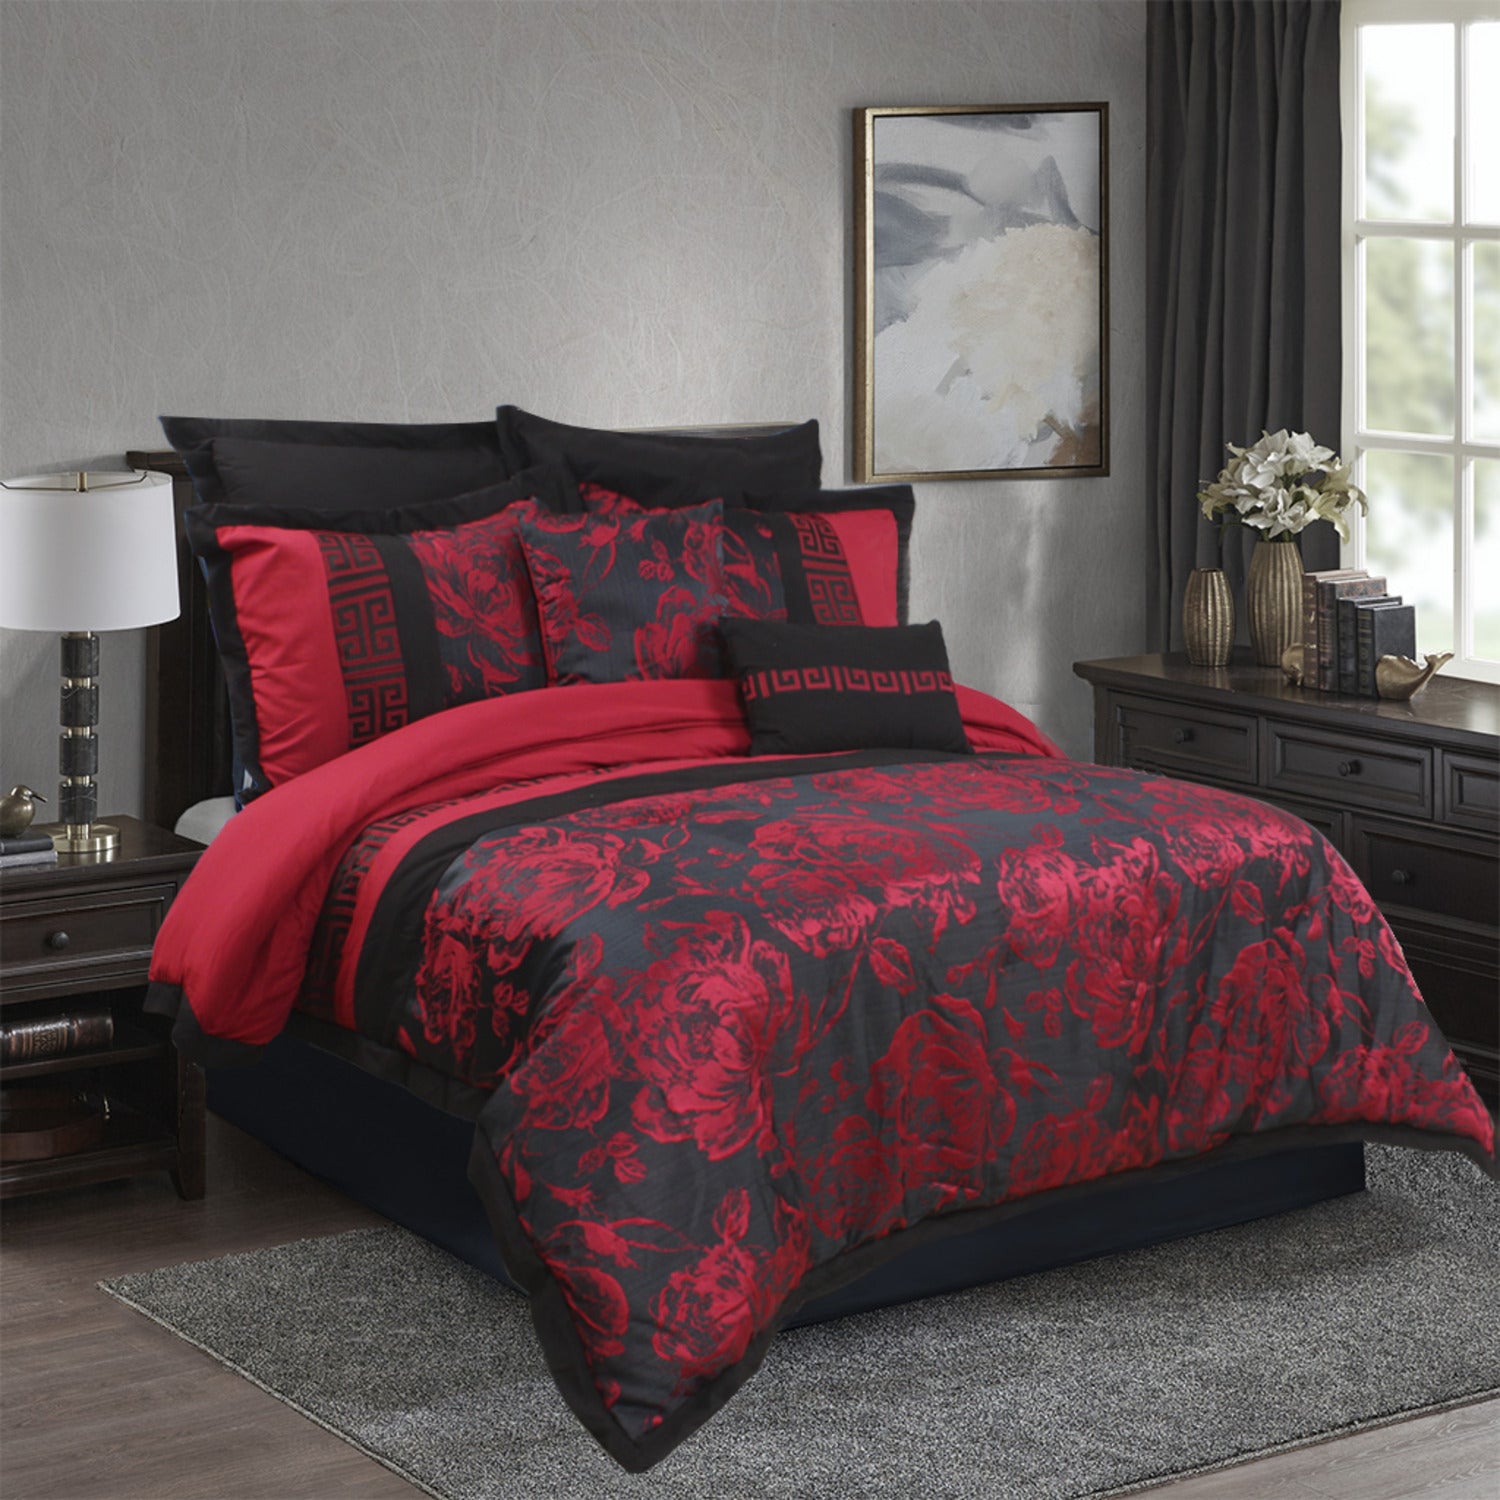 TANG 7PC BURGUNDY BEDDING COMFORTER SET. RUFFLE & PATCHWORK, MICROFIBER FABRIC, FADE RESISTANT, SUPER SOFT, BED IN A BAG